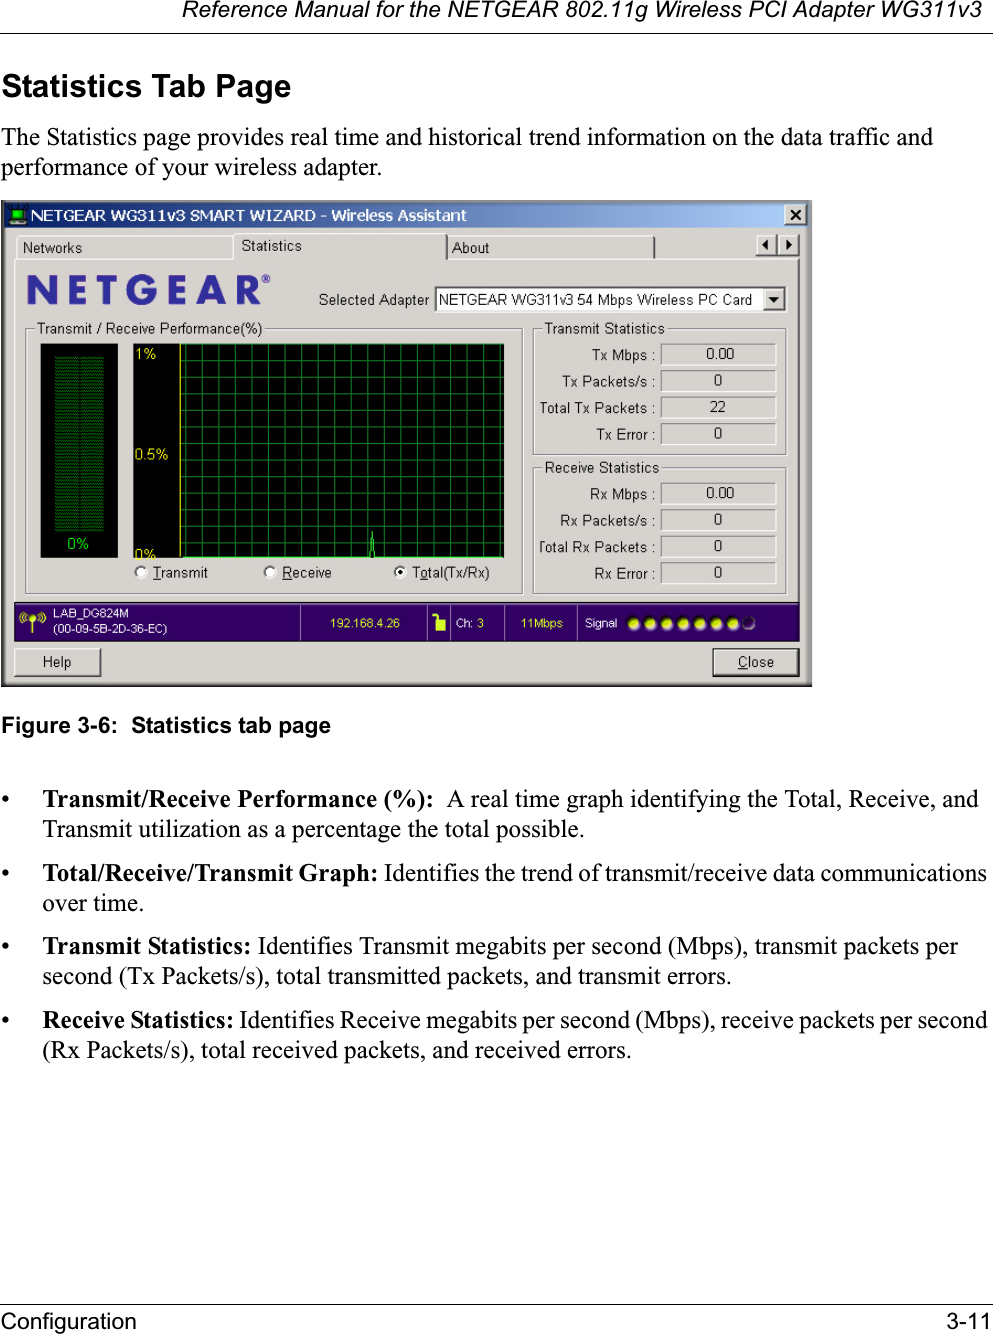 Reference Manual for the NETGEAR 802.11g Wireless PCI Adapter WG311v3Configuration 3-11Statistics Tab PageThe Statistics page provides real time and historical trend information on the data traffic and performance of your wireless adapter. Figure 3-6:  Statistics tab page•Transmit/Receive Performance (%):  A real time graph identifying the Total, Receive, and Transmit utilization as a percentage the total possible.  •Total/Receive/Transmit Graph: Identifies the trend of transmit/receive data communications over time. •Transmit Statistics: Identifies Transmit megabits per second (Mbps), transmit packets per second (Tx Packets/s), total transmitted packets, and transmit errors.•Receive Statistics: Identifies Receive megabits per second (Mbps), receive packets per second (Rx Packets/s), total received packets, and received errors.